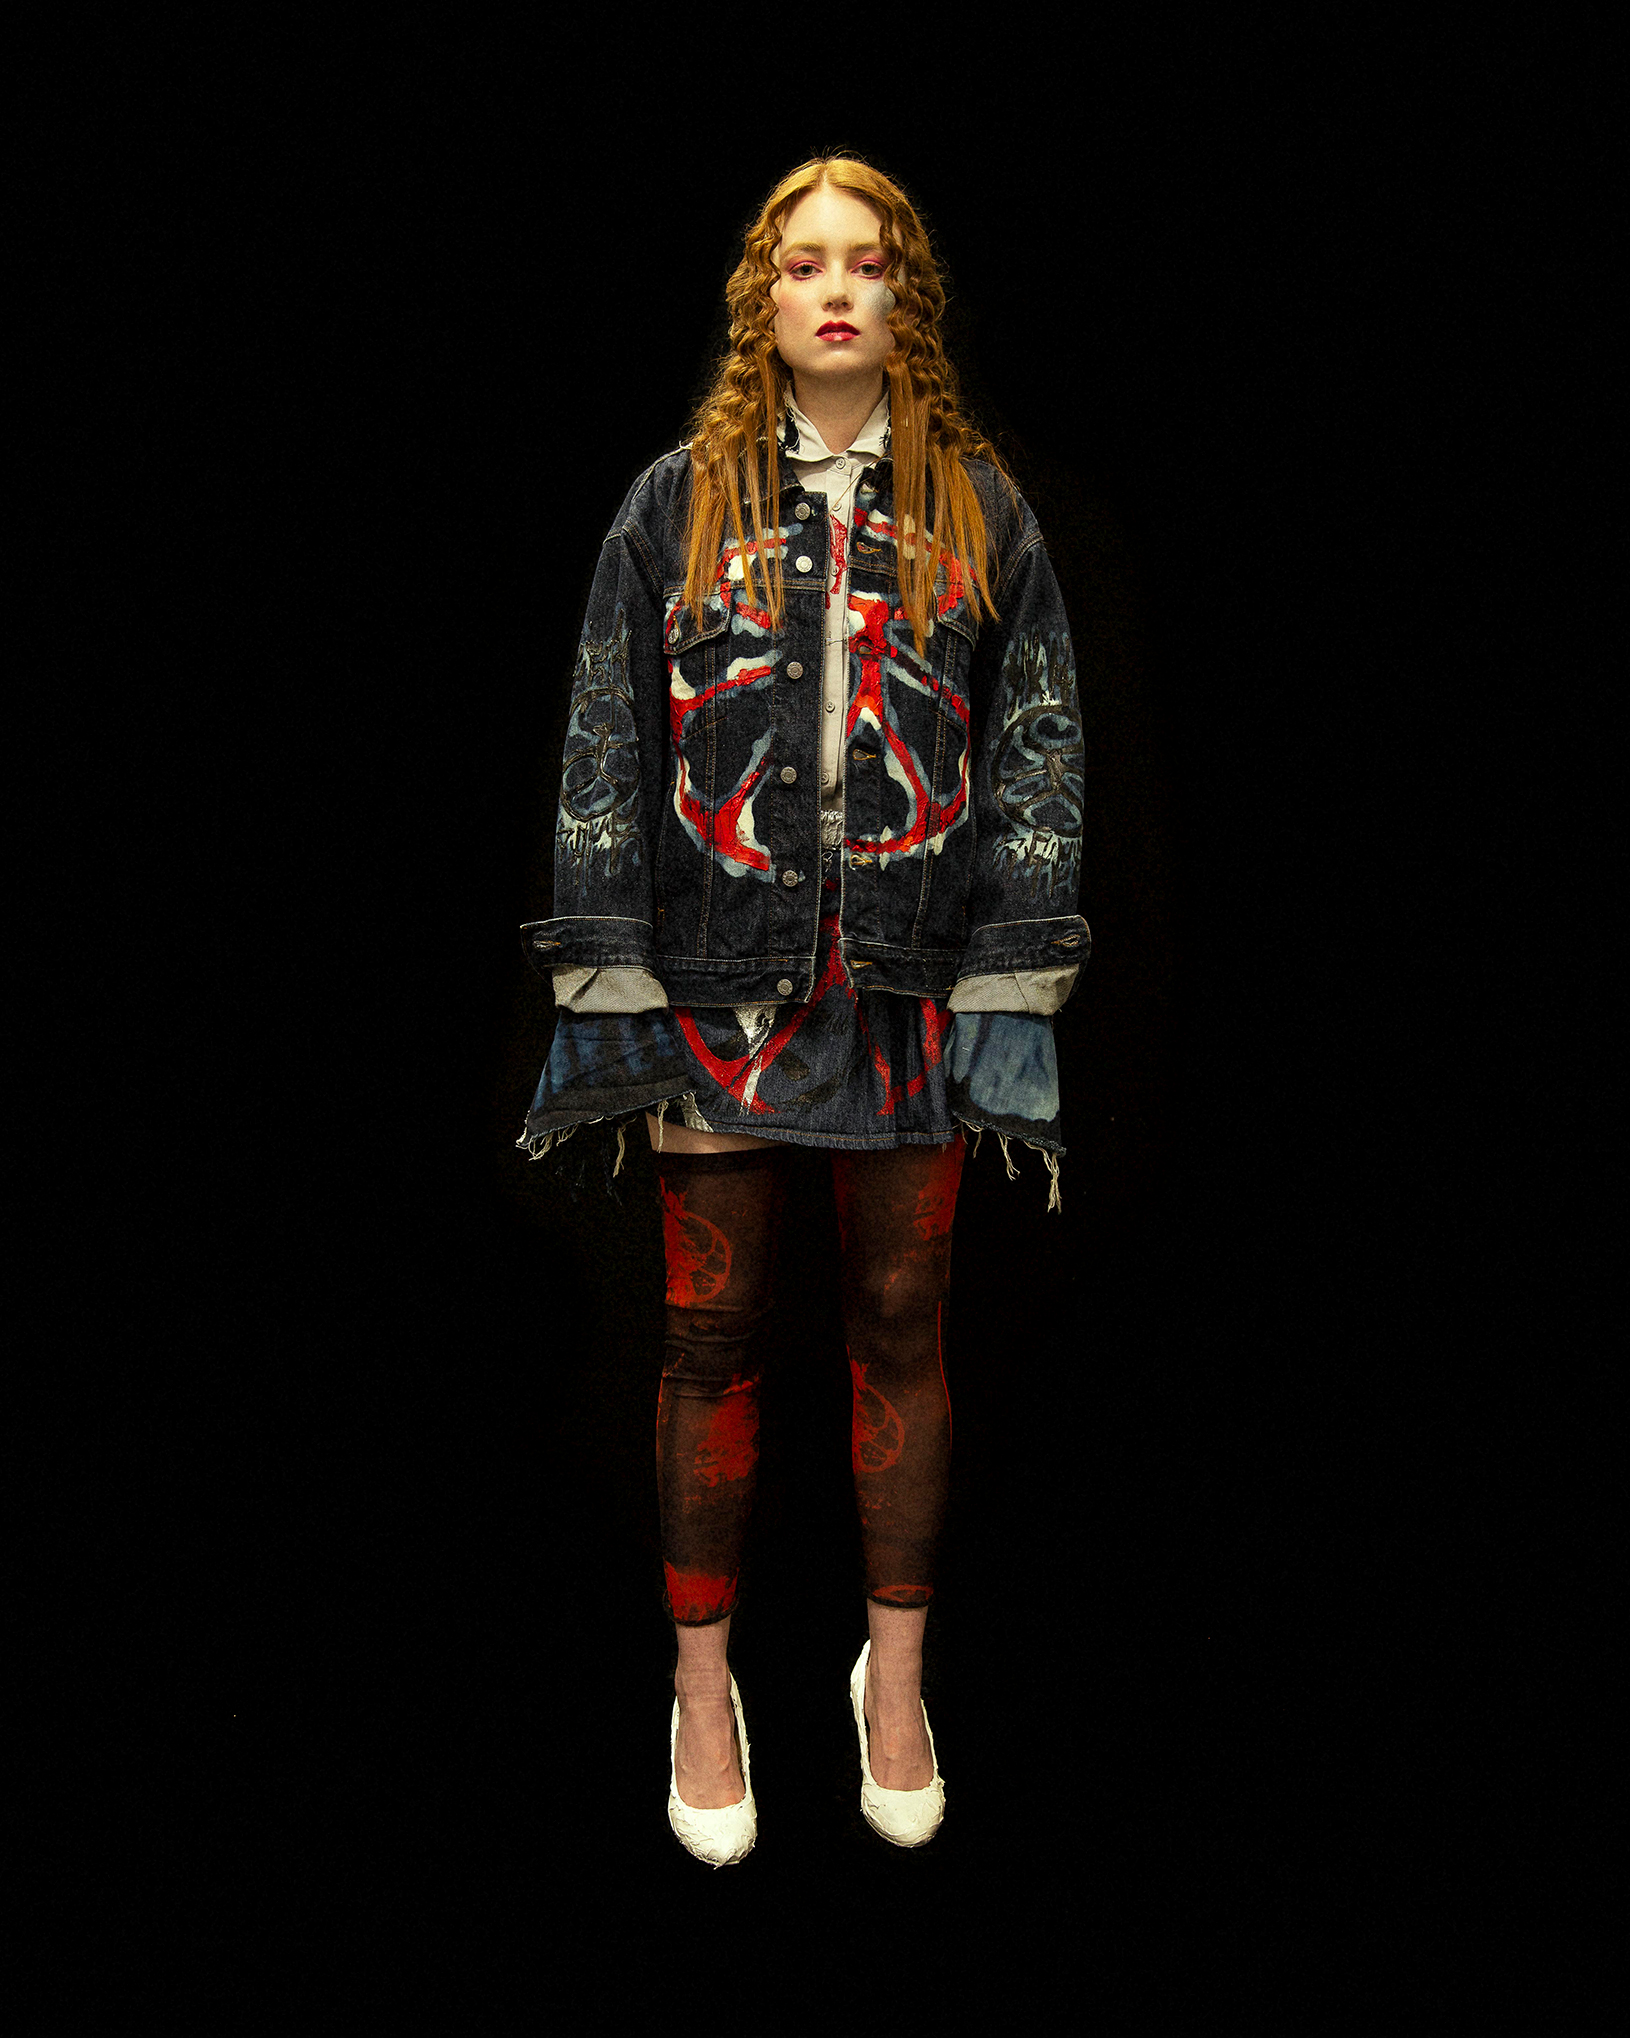 Full body image of a model facing the camera against a black background wearing a patchwork denim jacket and dark red leggings